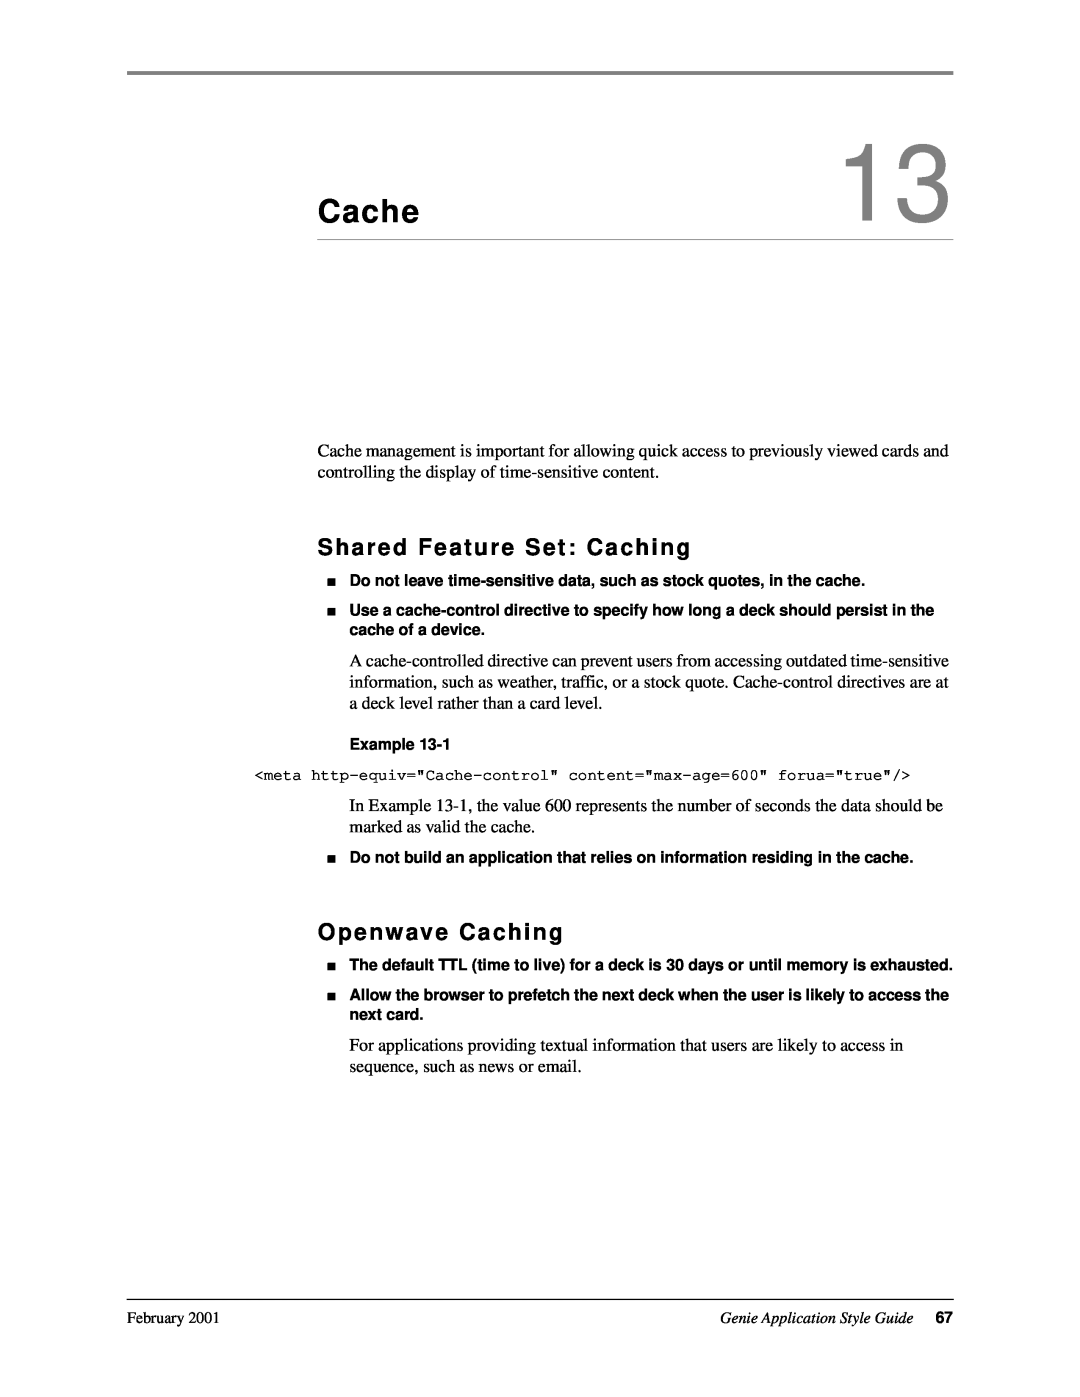 Genie 7110 manual Cache, Shared Feature Set Caching, Openwave Caching 